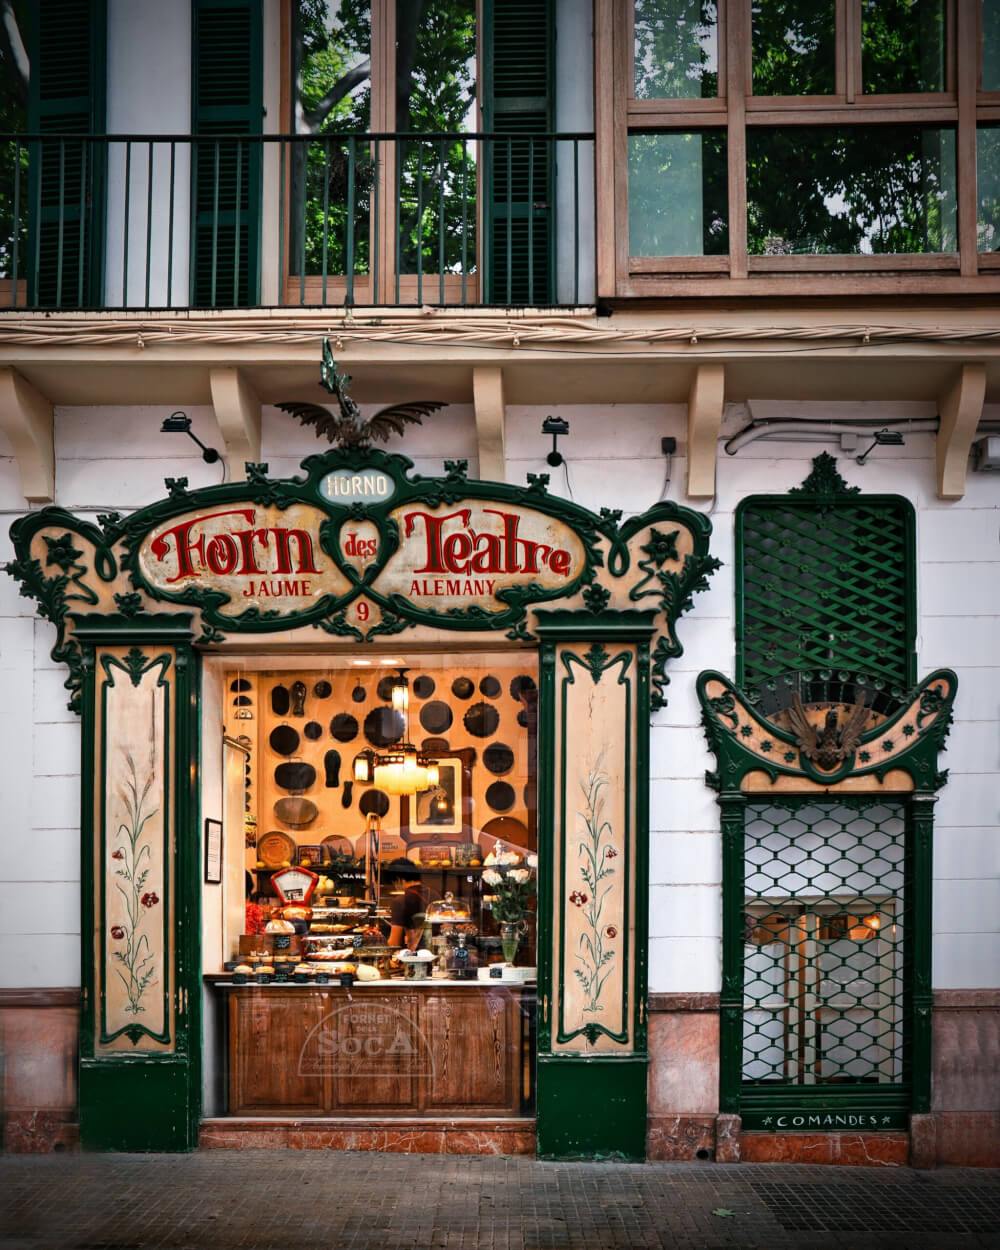 The facade of a historic bakery "Forn des Teatre"